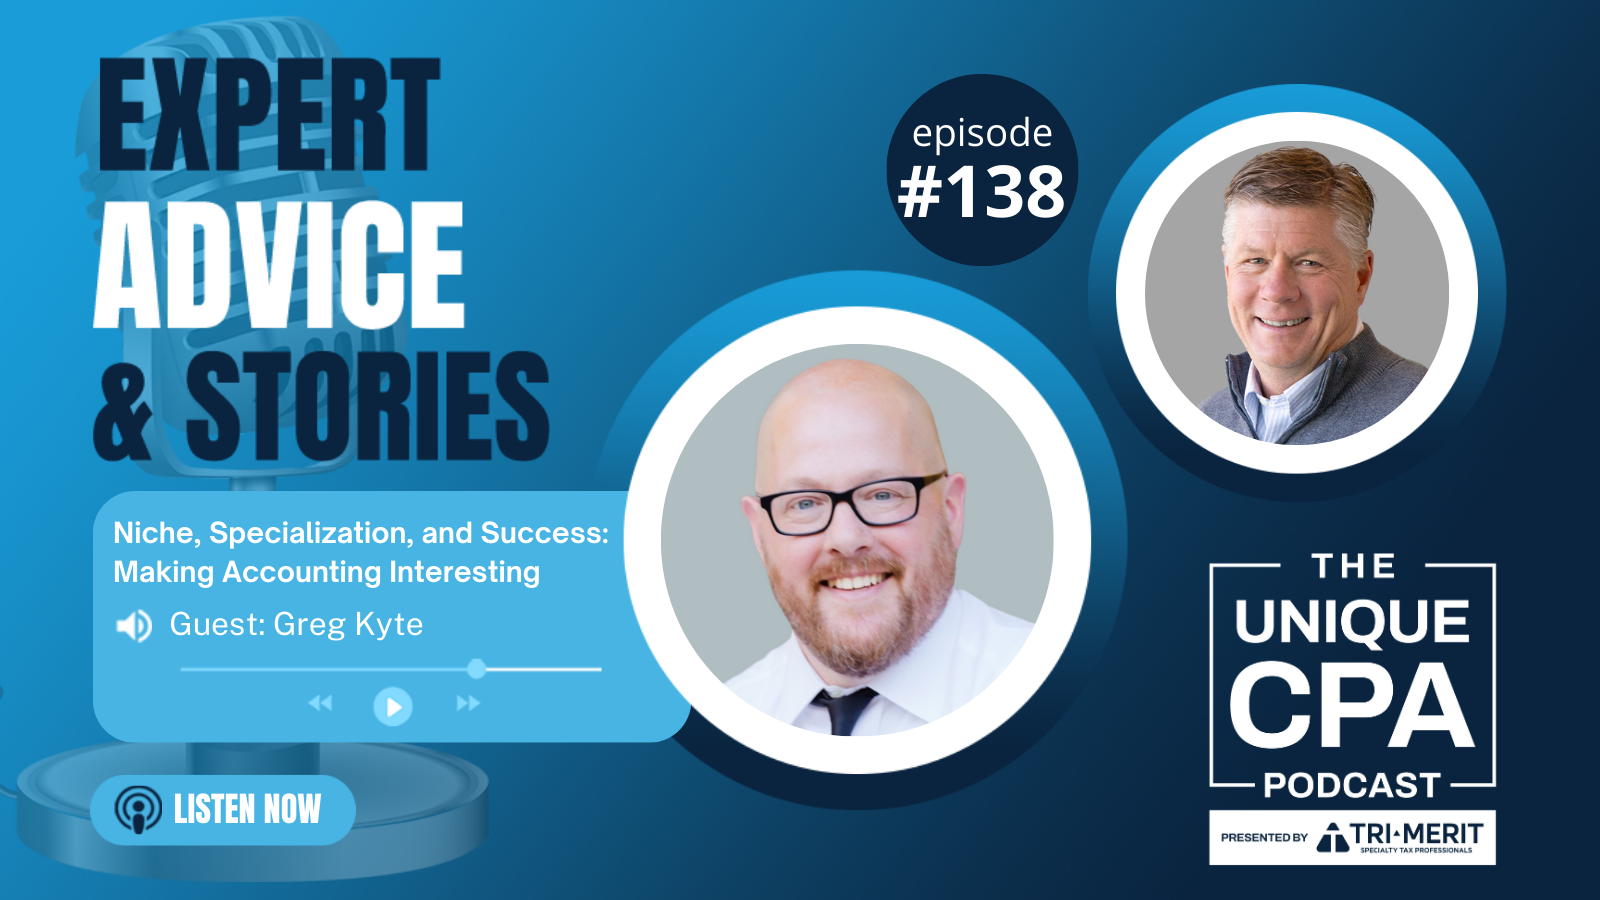 Unique Cpa Featured Image Ep 138 Greg Kyte - Niche, Specialization, And Success - Tri-Merit